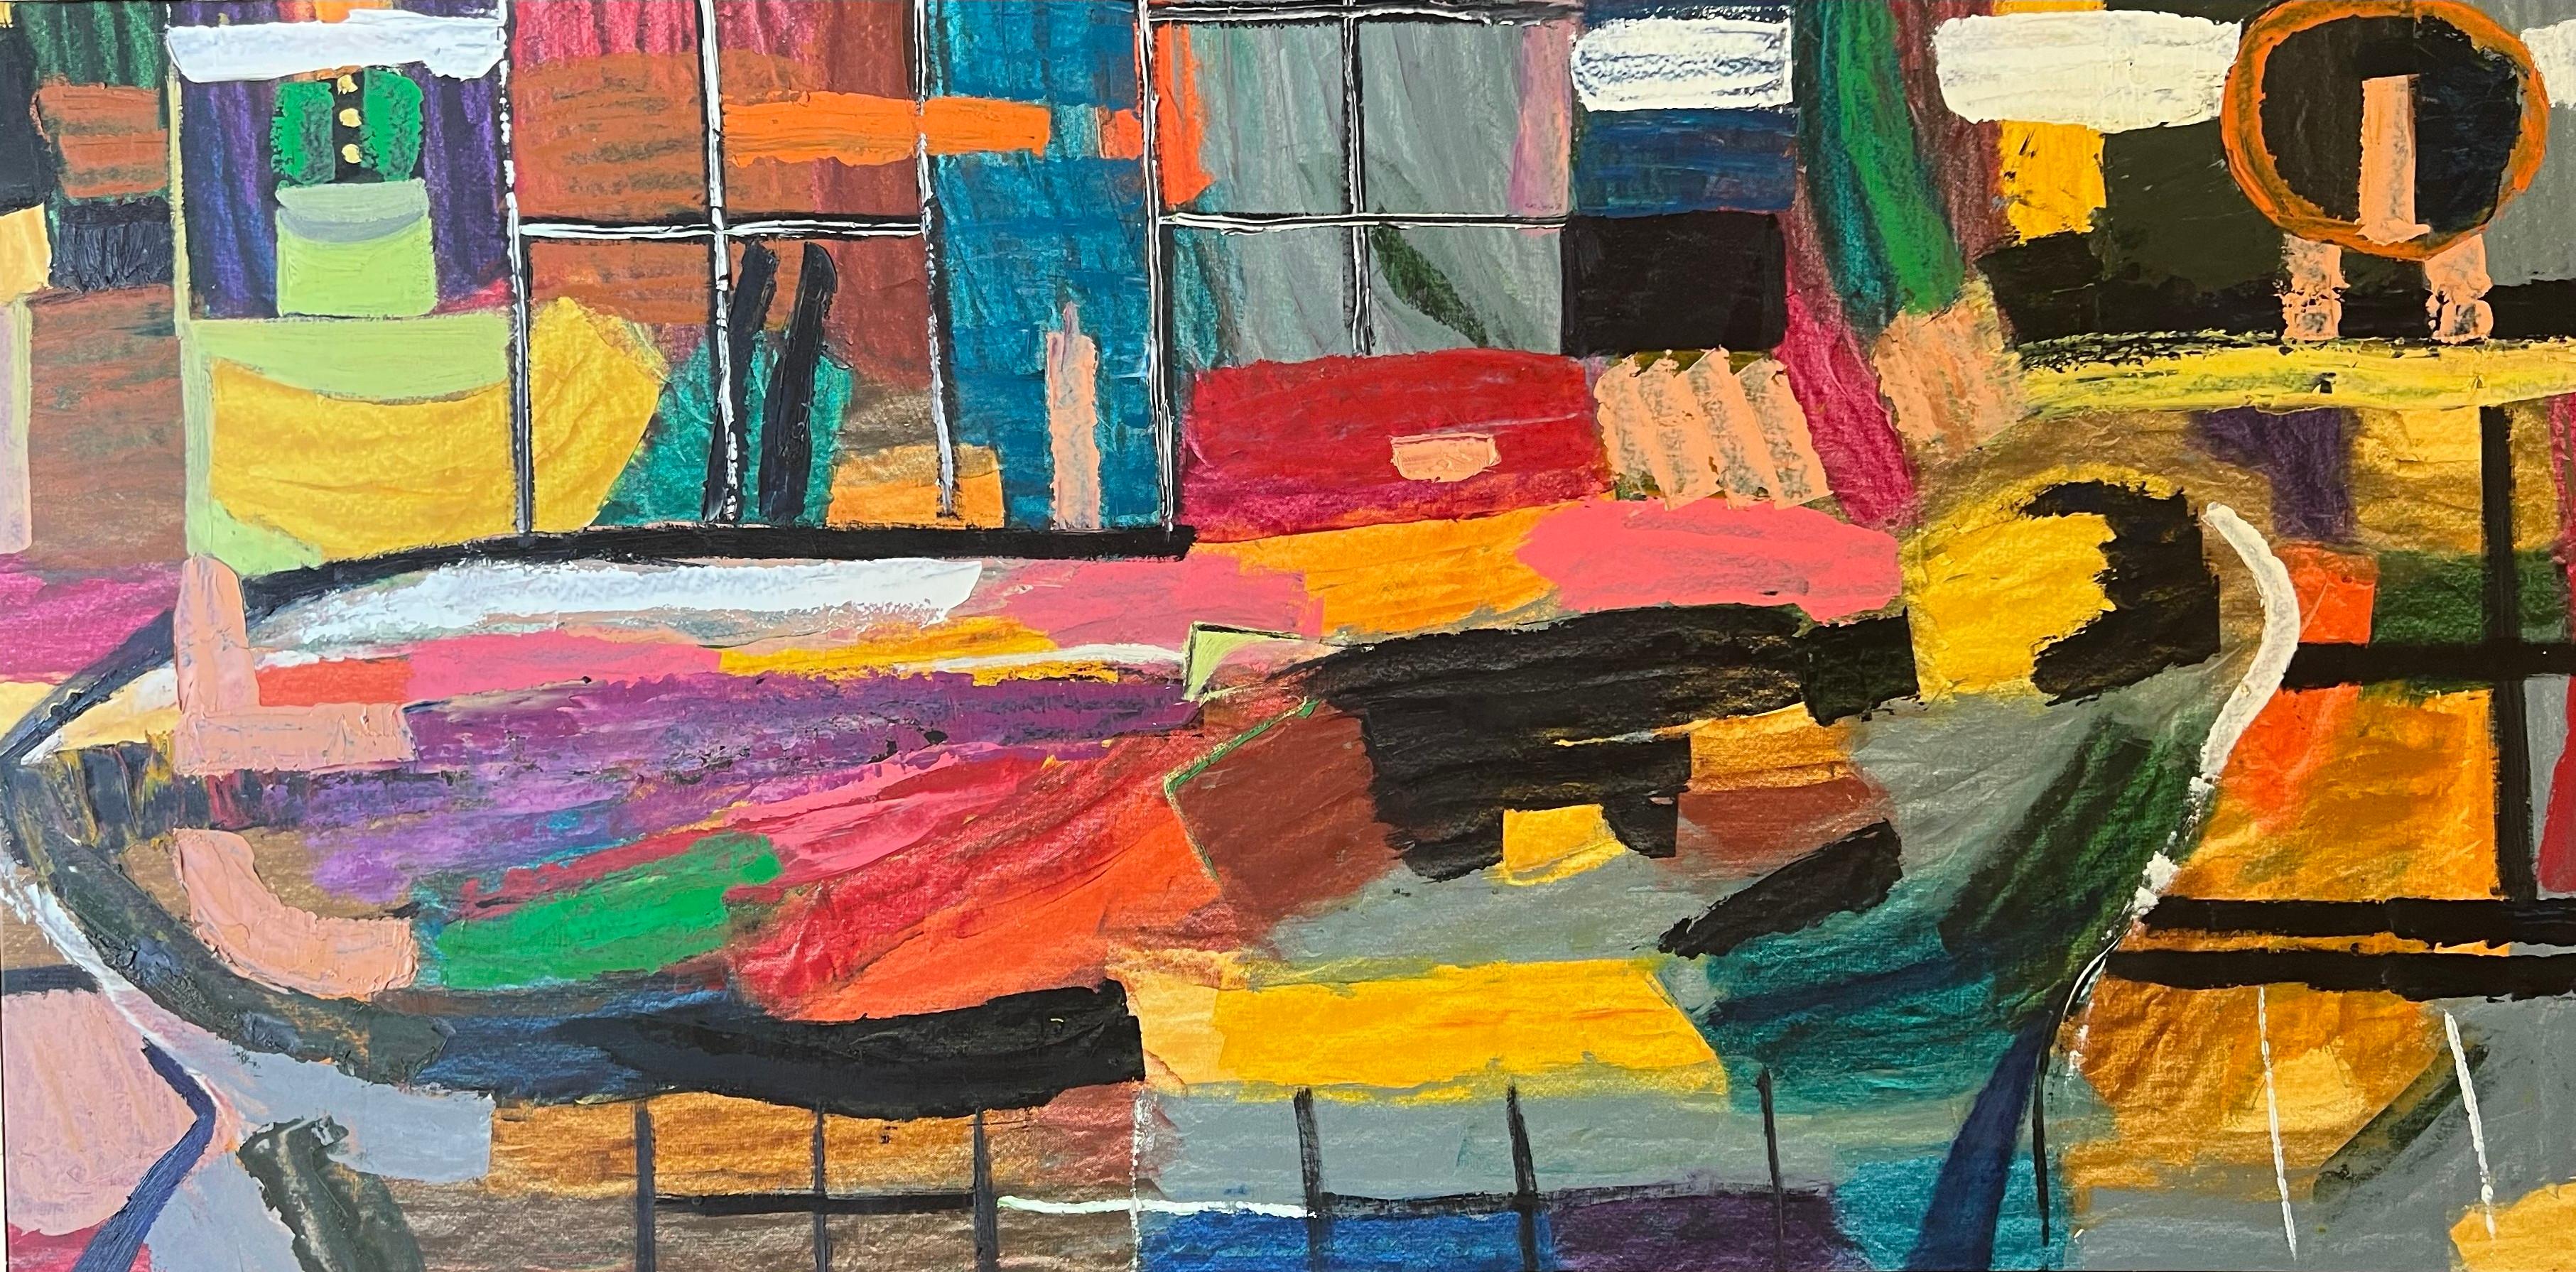 "Imagination" Abstract Oil Painting 39" x 78" inch by Ashraf Zamzami

Ashraf El Zamzami was a graduate of the Academy of Fine Arts in Minya, and he fast made a name for himself in the local art scene in the mid-1990s with his palpably naive yet